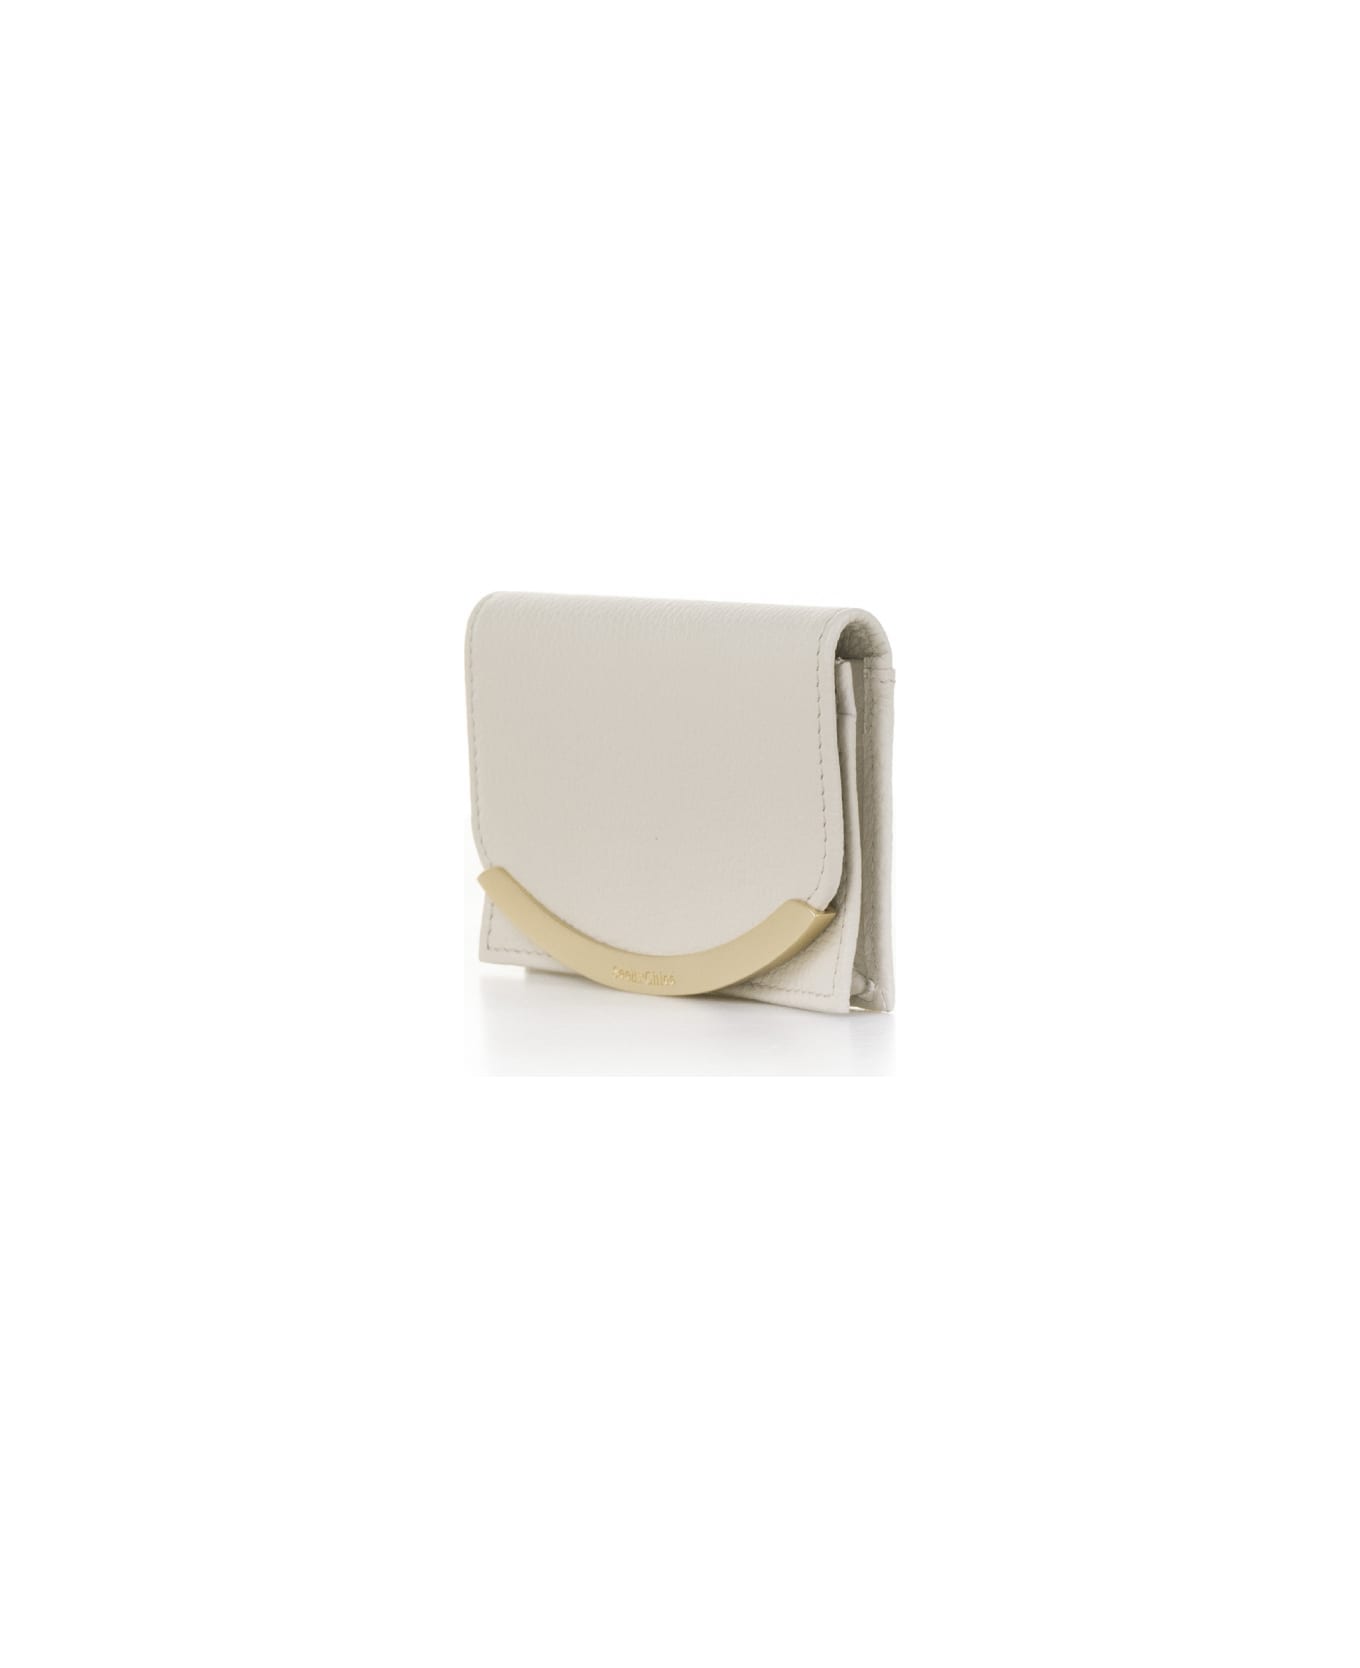 See by Chloé Lizzie Beige Leather Wallet - CEMENT BEIGE